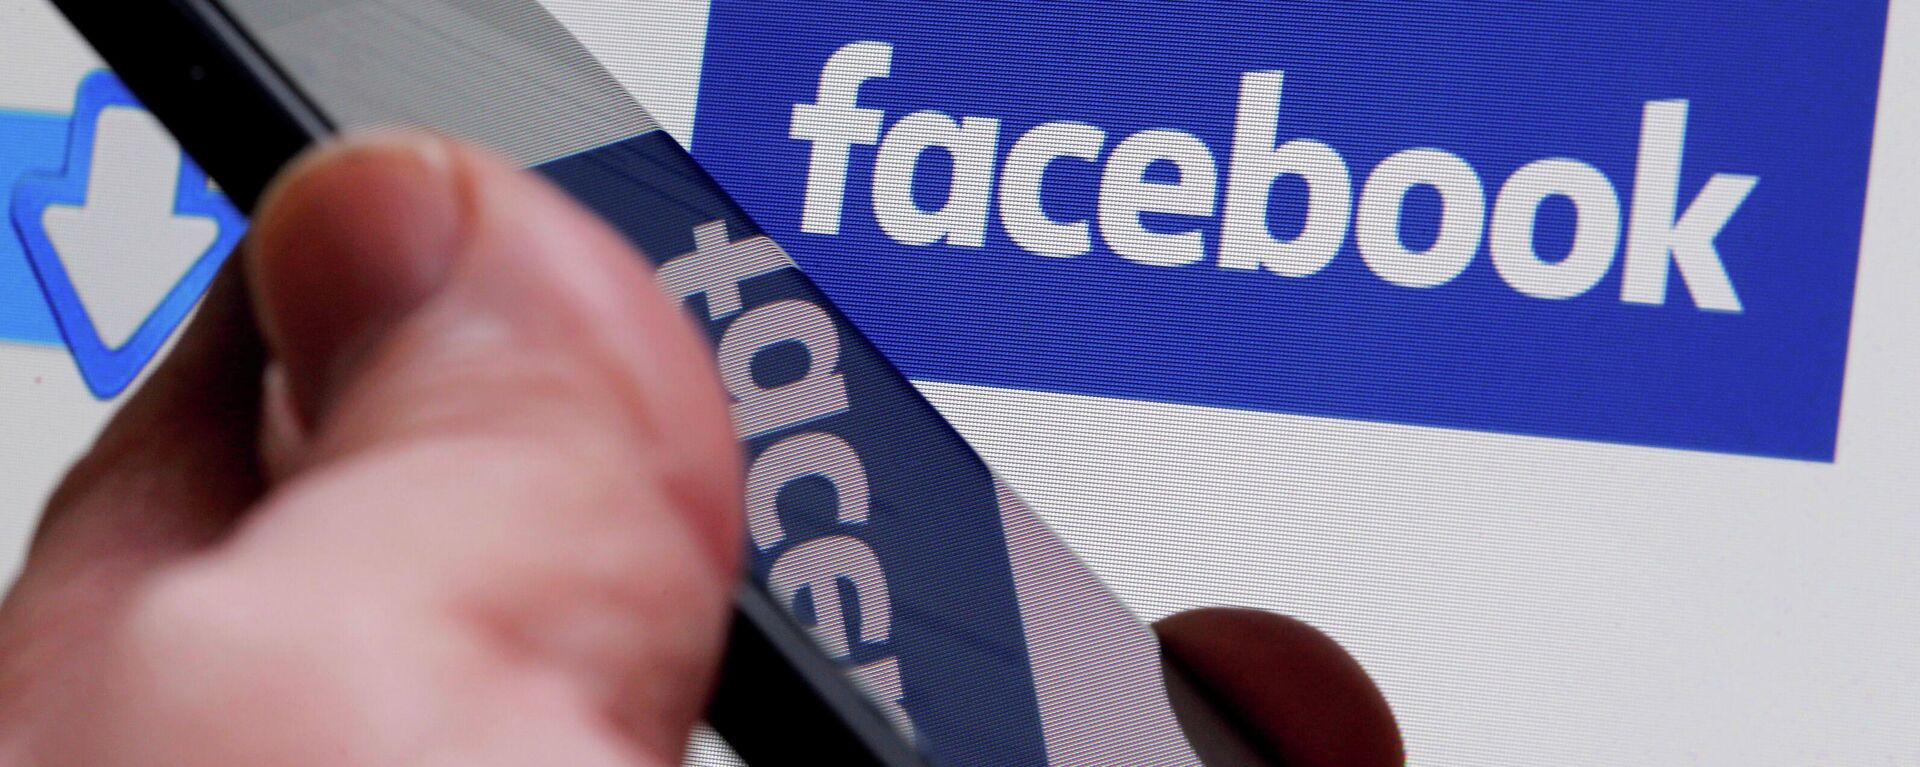 FILE PHOTO: The Facebook logo is displayed on their website in an illustration photo taken in Bordeaux, France, on February 1, 2017 - Sputnik International, 1920, 18.10.2021